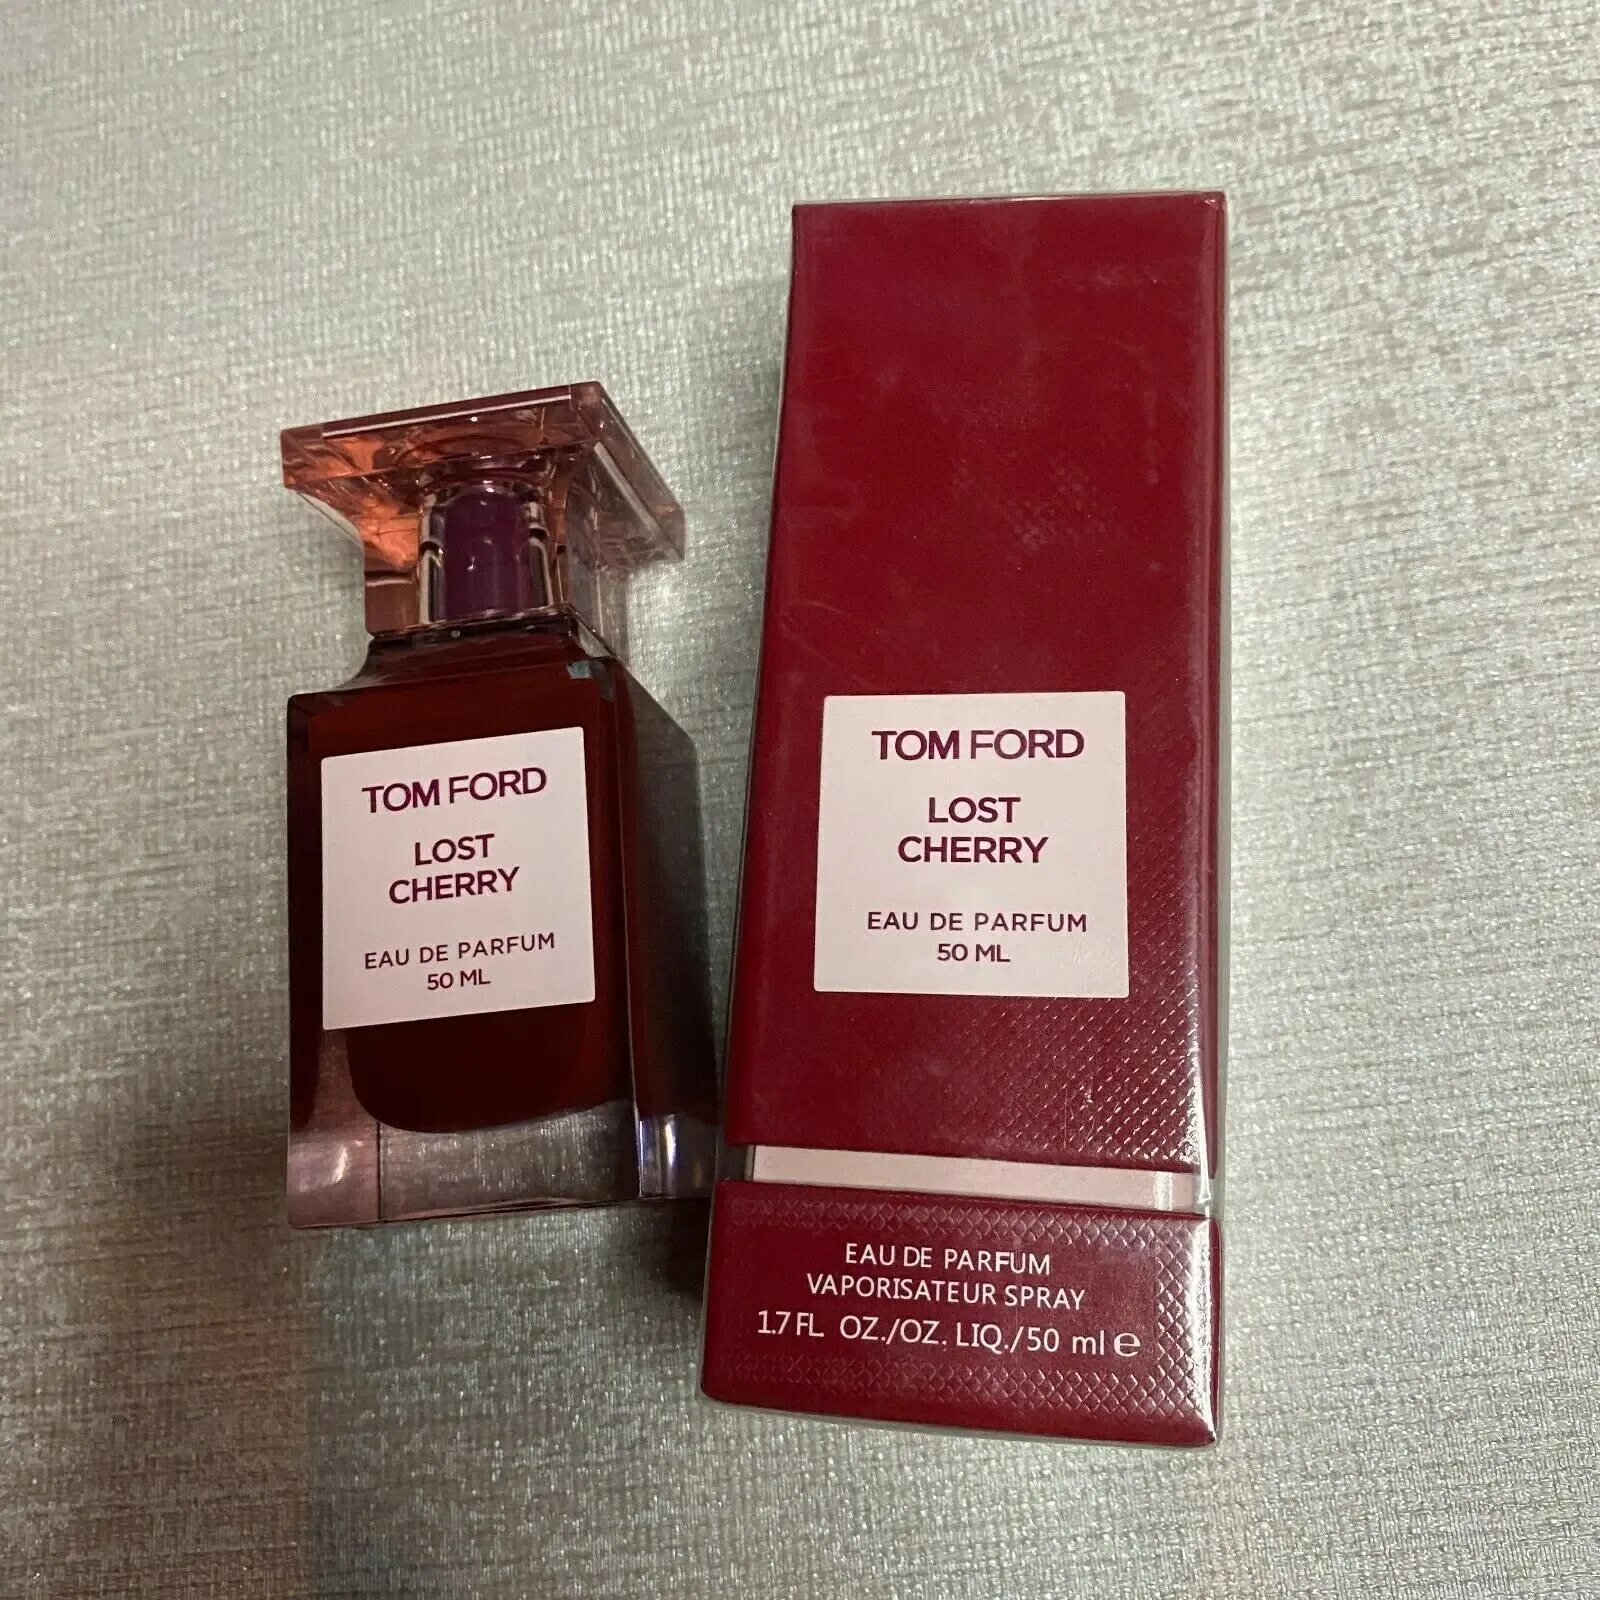 Tom ford lost cherry 50. Духи том Форд черри 50 мл. Tom Ford Lost Cherry 50 ml. Духи том Форд лост черри. Tom Ford Lost Cherry EDP 50 ml.